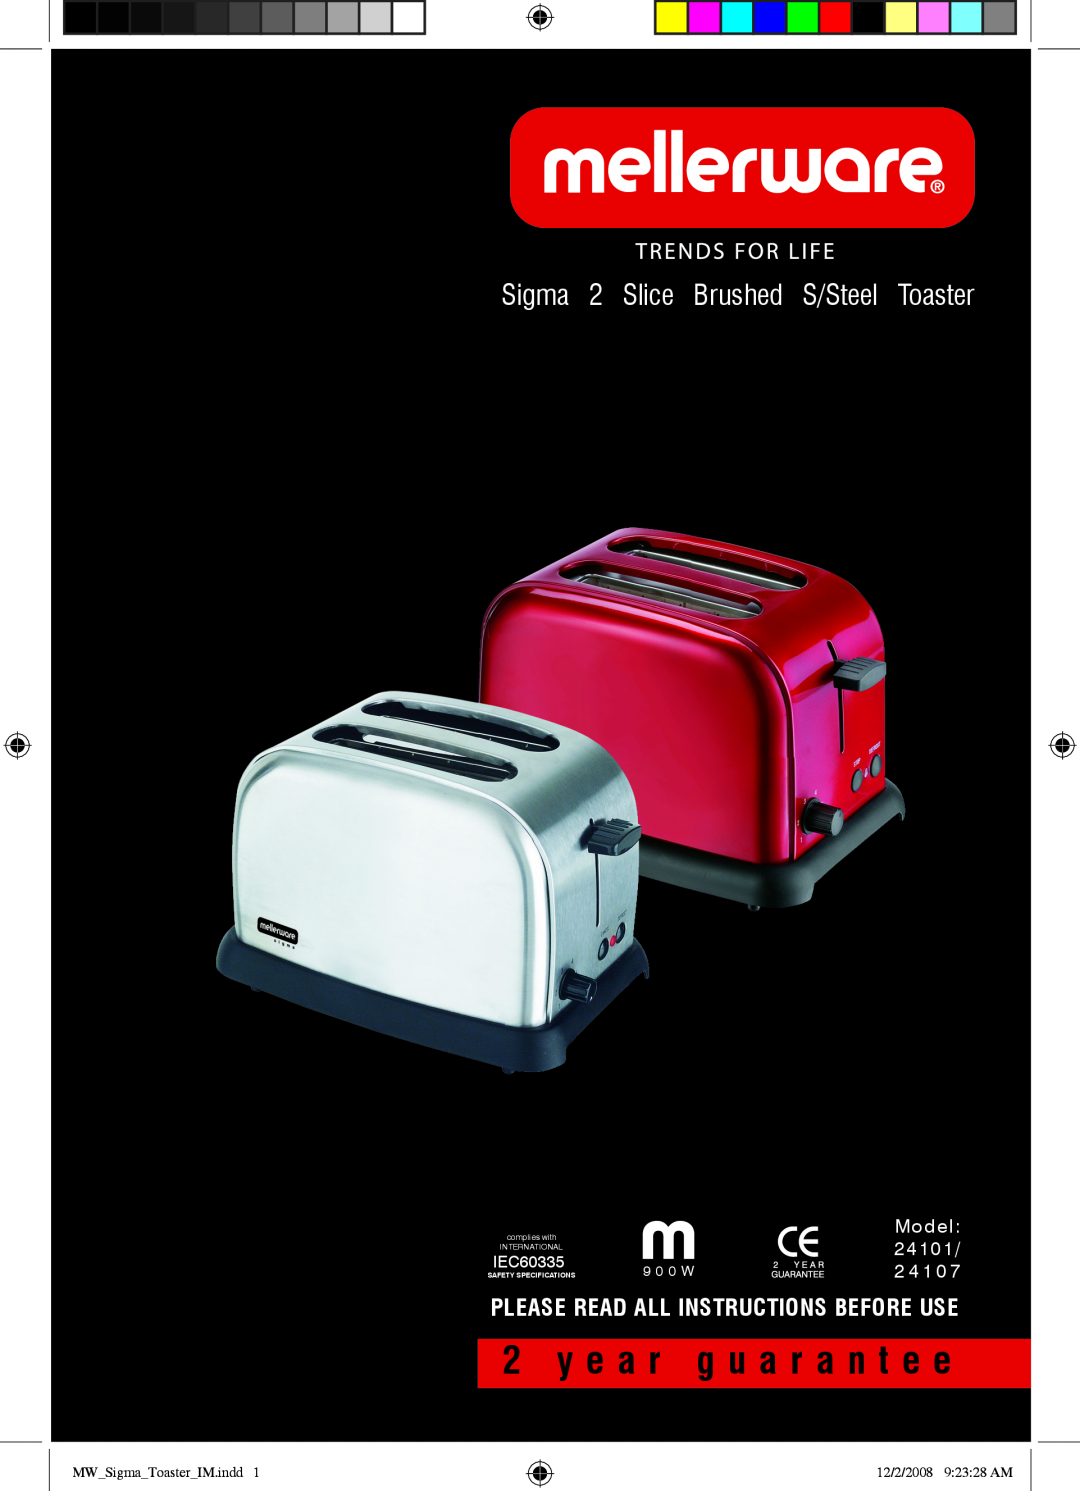 Mellerware 24101 specifications IEC60335, 2 4 1 0, y e a r g u a r a n t e e, Sigma 2 Slice Brushed S/Steel Toaster, Model 